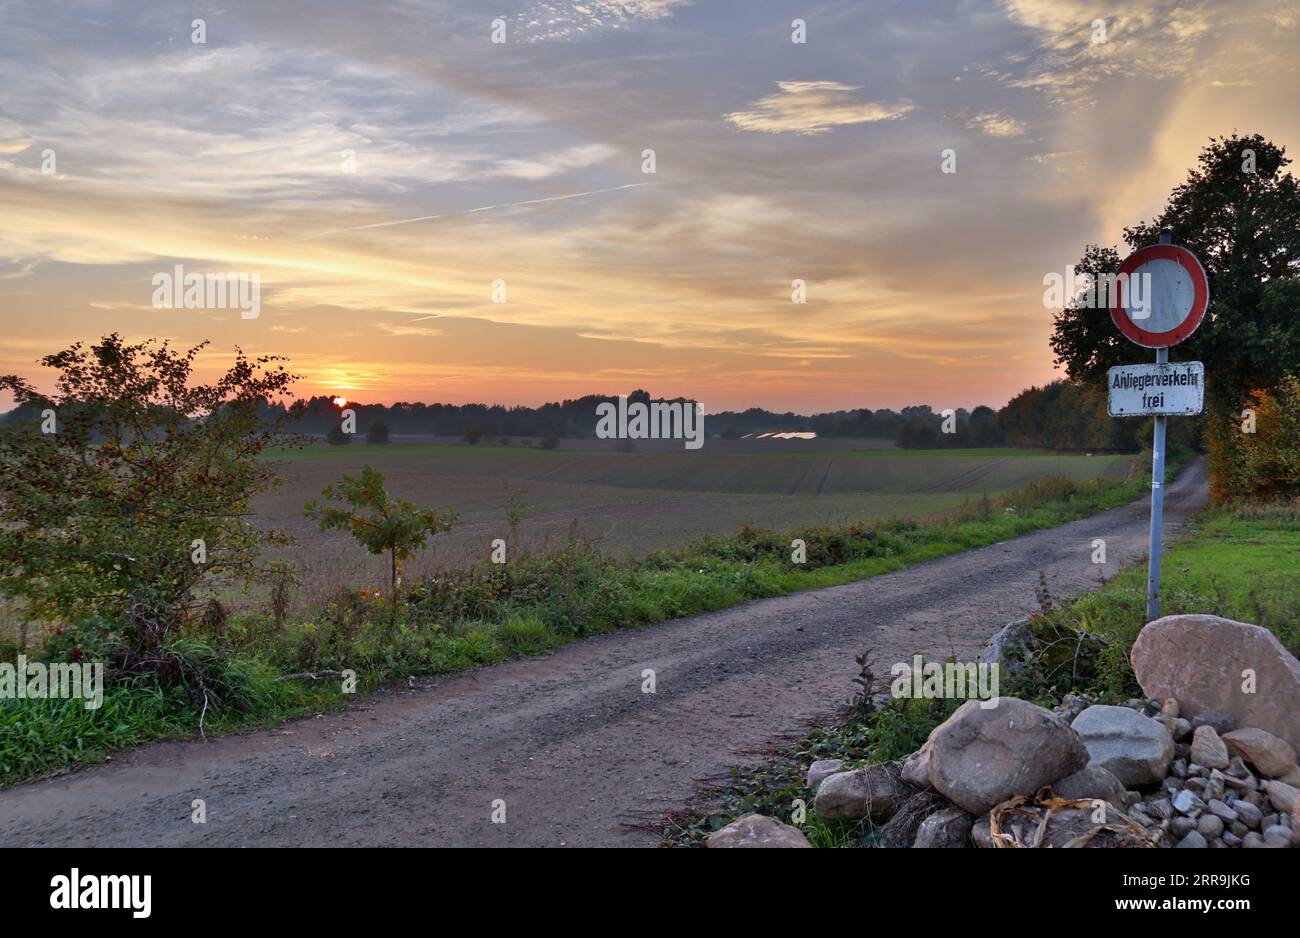 View Of An Agriculturally Used Field With Green Grass Stock Photo